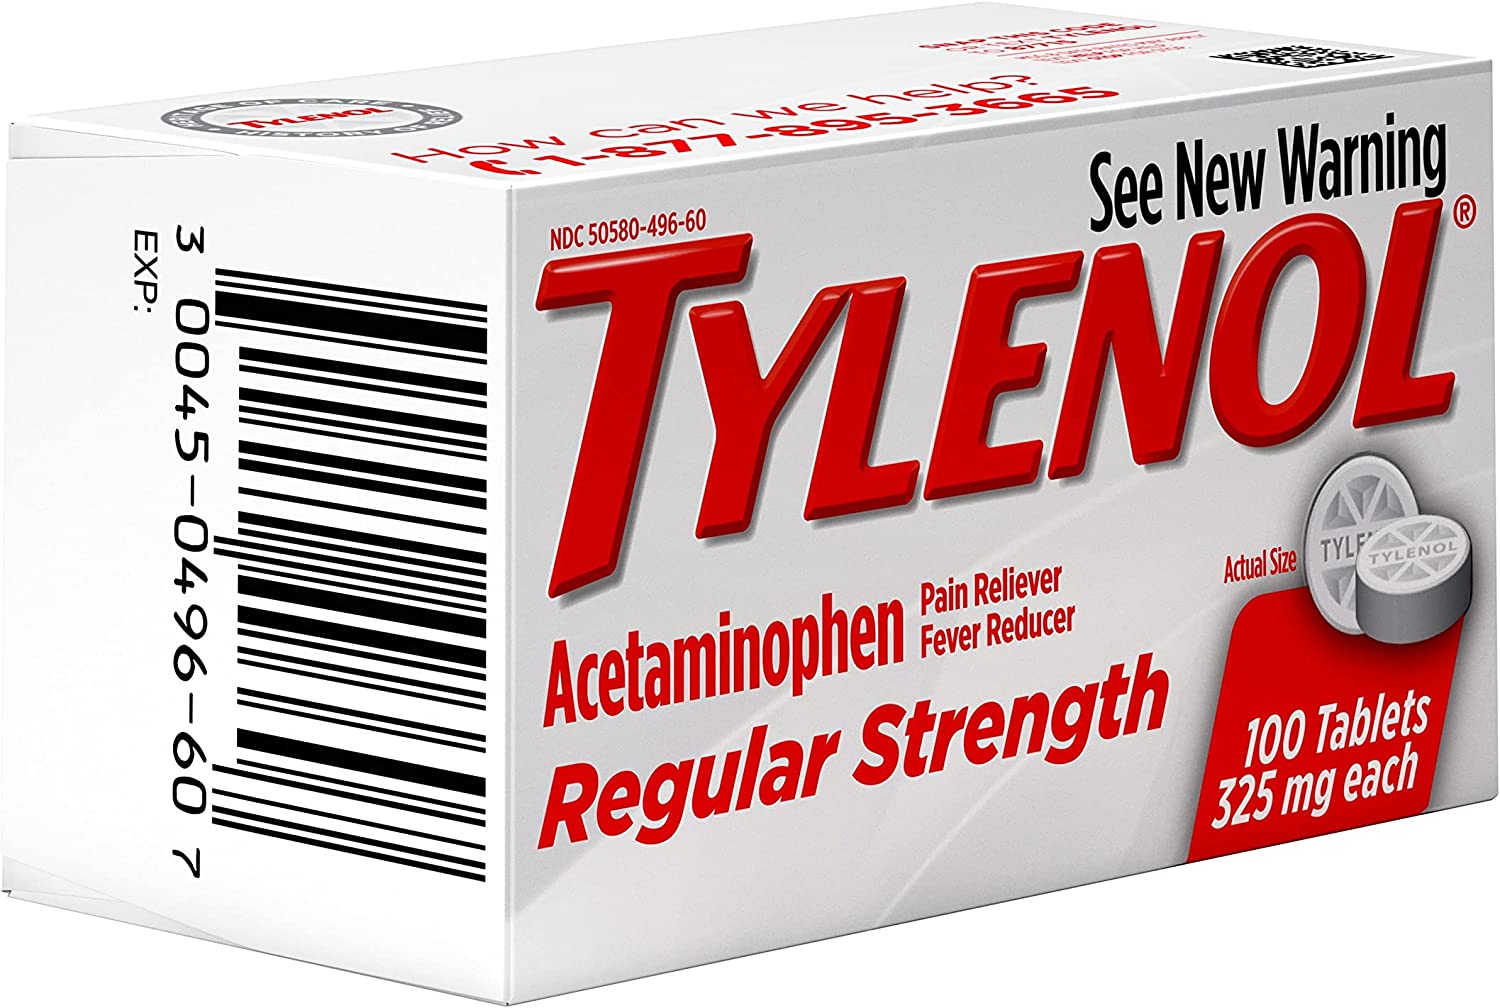 Tylenol Regular Strength Tablets with 325 mg Acetaminophen, 100 Ct - image 4 of 14